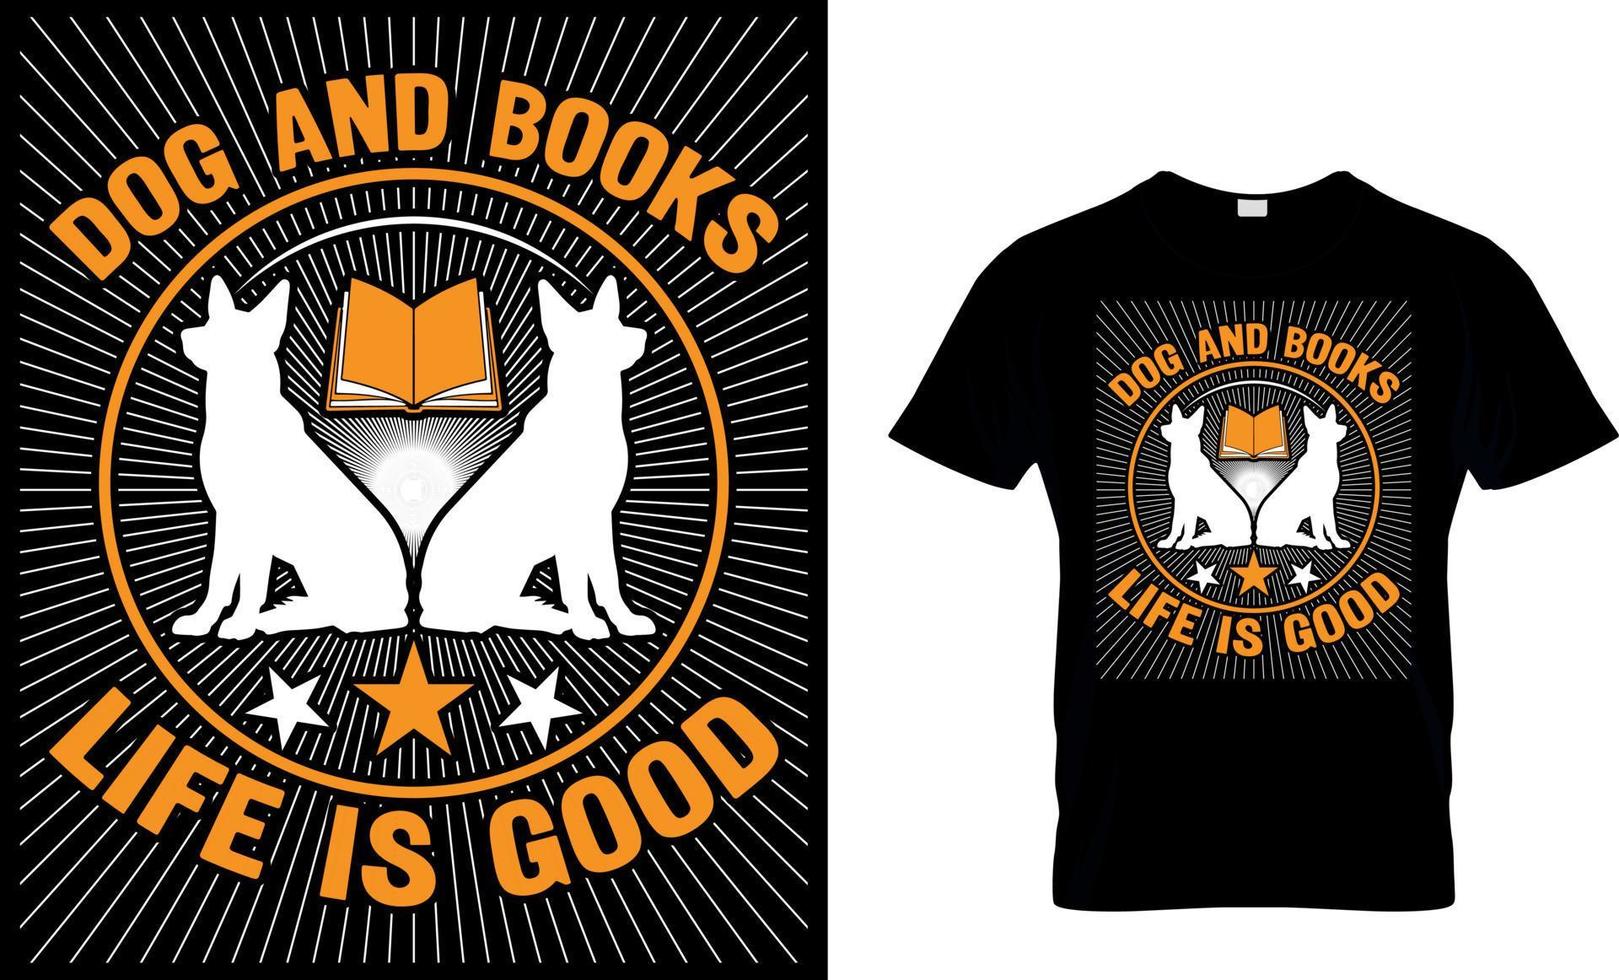 dog and books life is good. book t-shirt design. book t shirt design.book design. read design. reading t shirt design. cat design. dog design. coffee design. vector